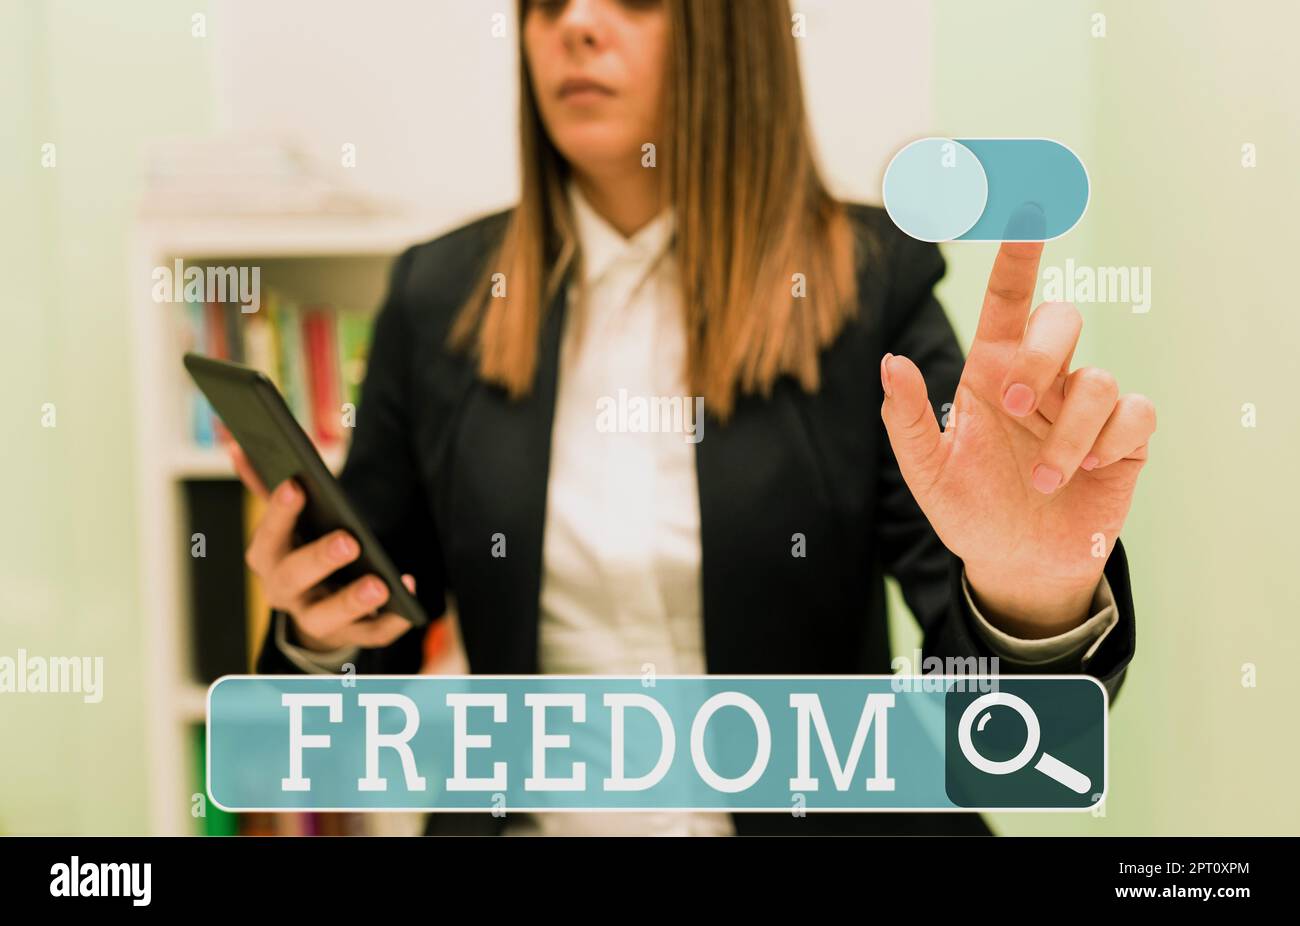 Text showing inspiration Freedom, Business showcase power or right to act speak or think as one wants without hindrance Businesswoman Holding Cellphon Stock Photo